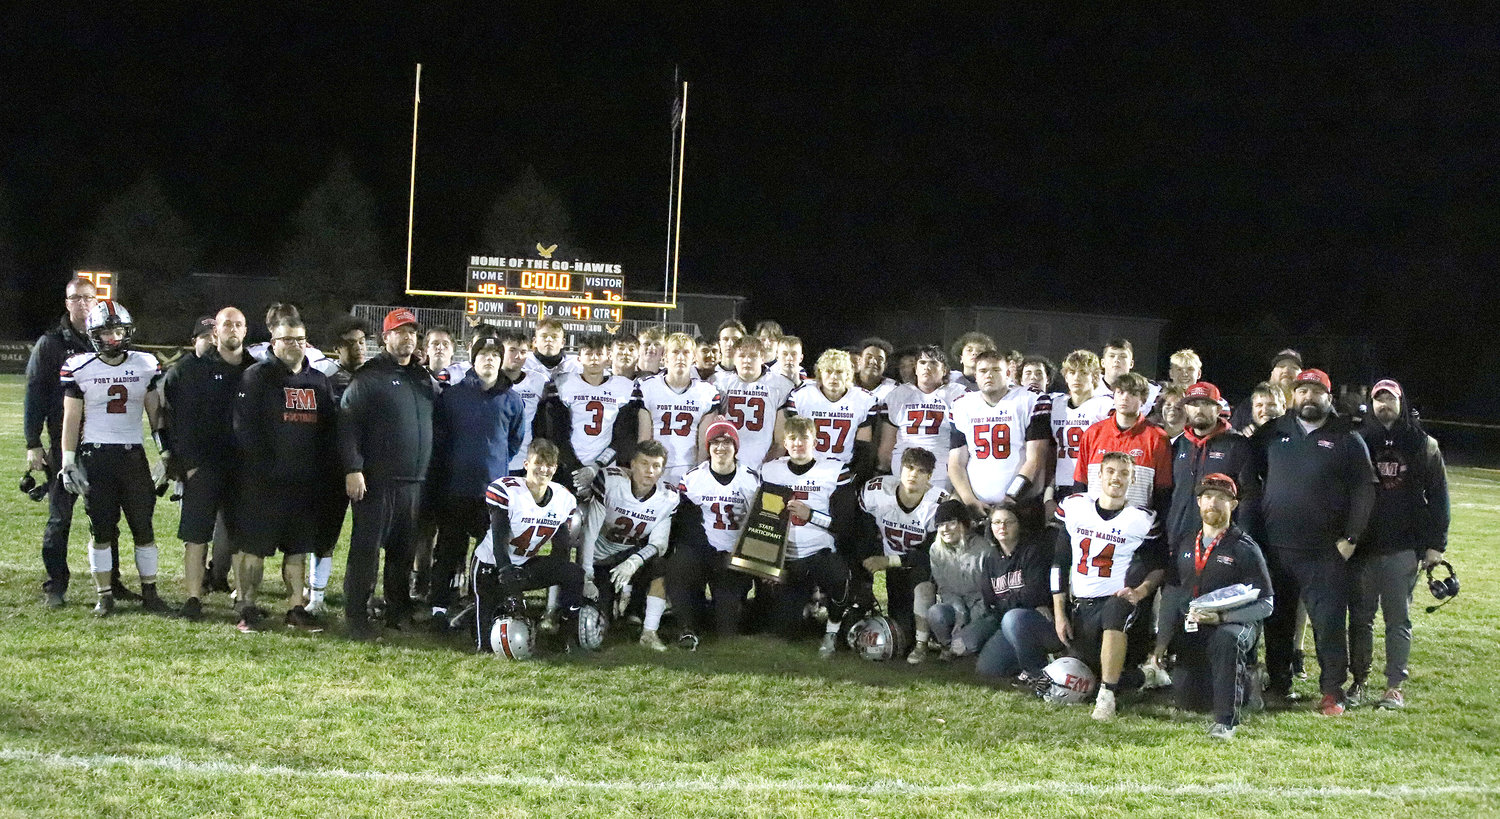 The 2022 Bloodhound football team wraps its season in a playoff banner after finishing 7-3 with an opening round loss to Waverly-Shell Rock in Class 4A Pod B.